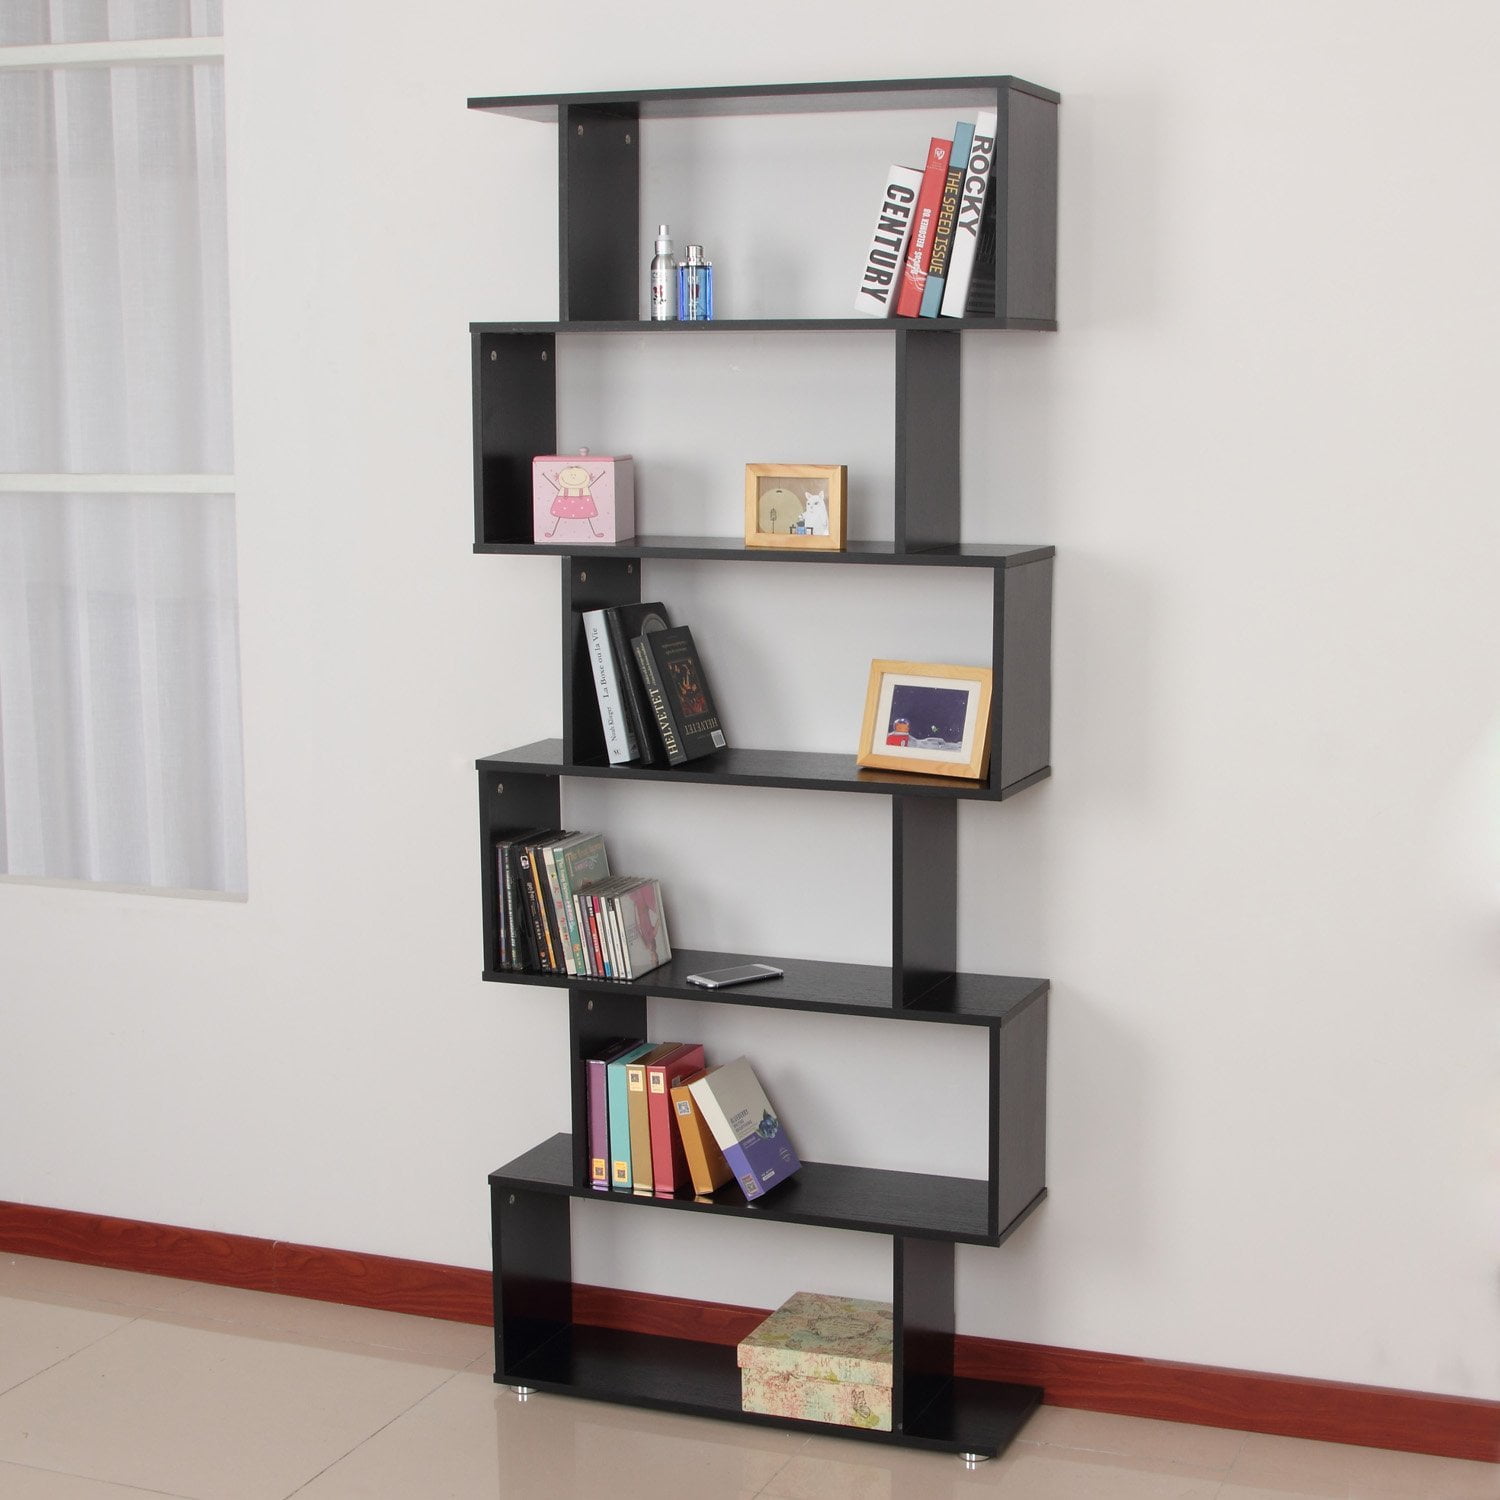 Wooden S Shape Bookcase 6 Shelves Storage Display Home Office